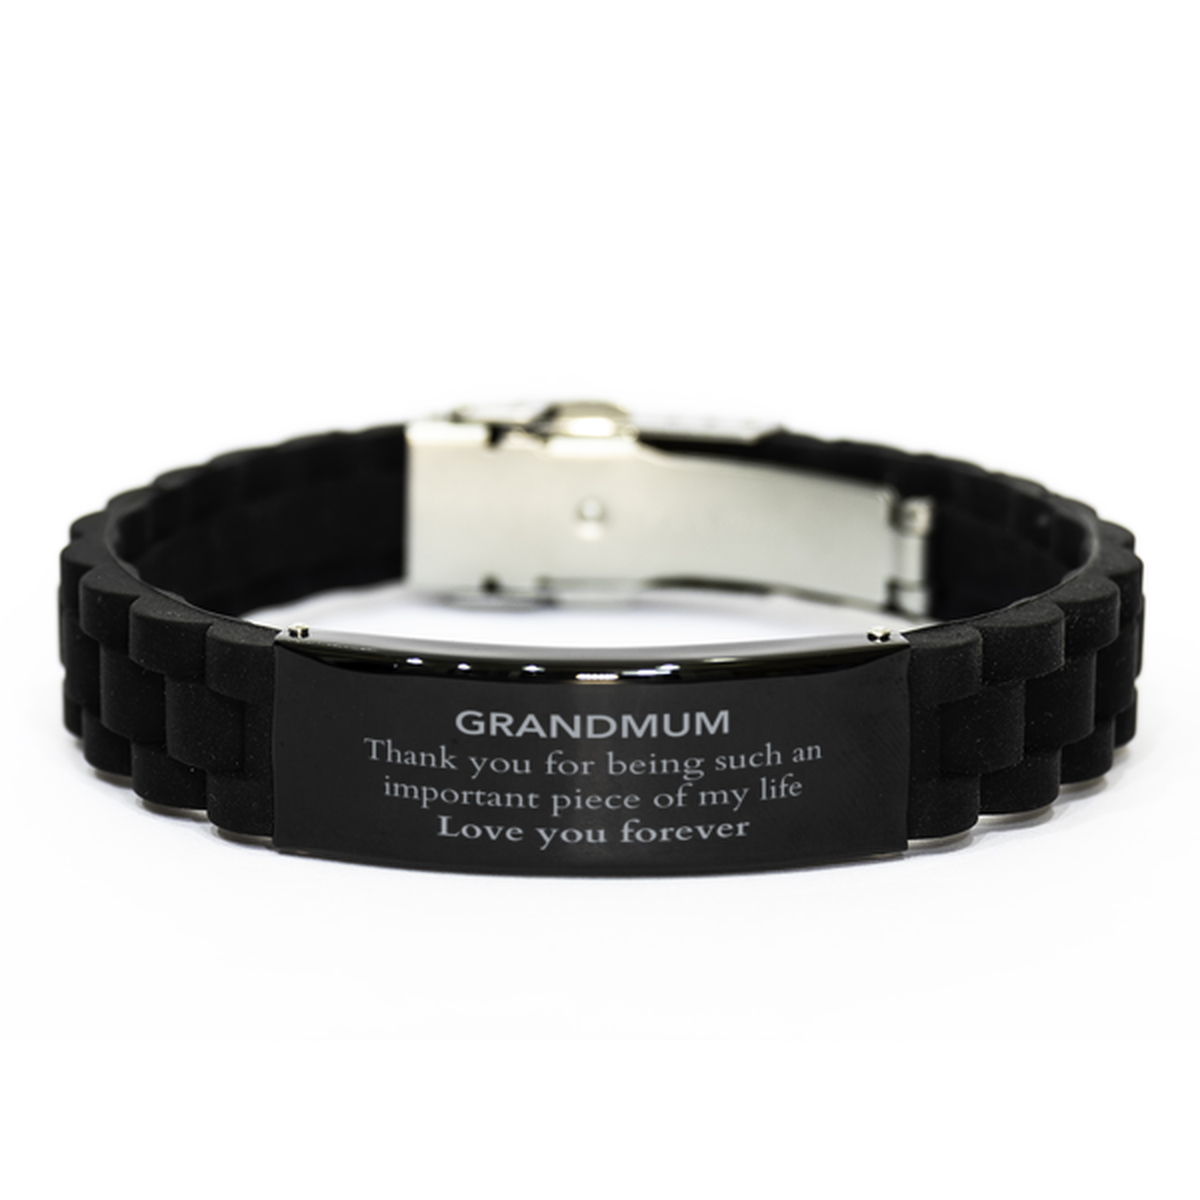 Appropriate Grandmum Black Glidelock Clasp Bracelet Epic Birthday Gifts for Grandmum Thank you for being such an important piece of my life Grandmum Christmas Mothers Fathers Day